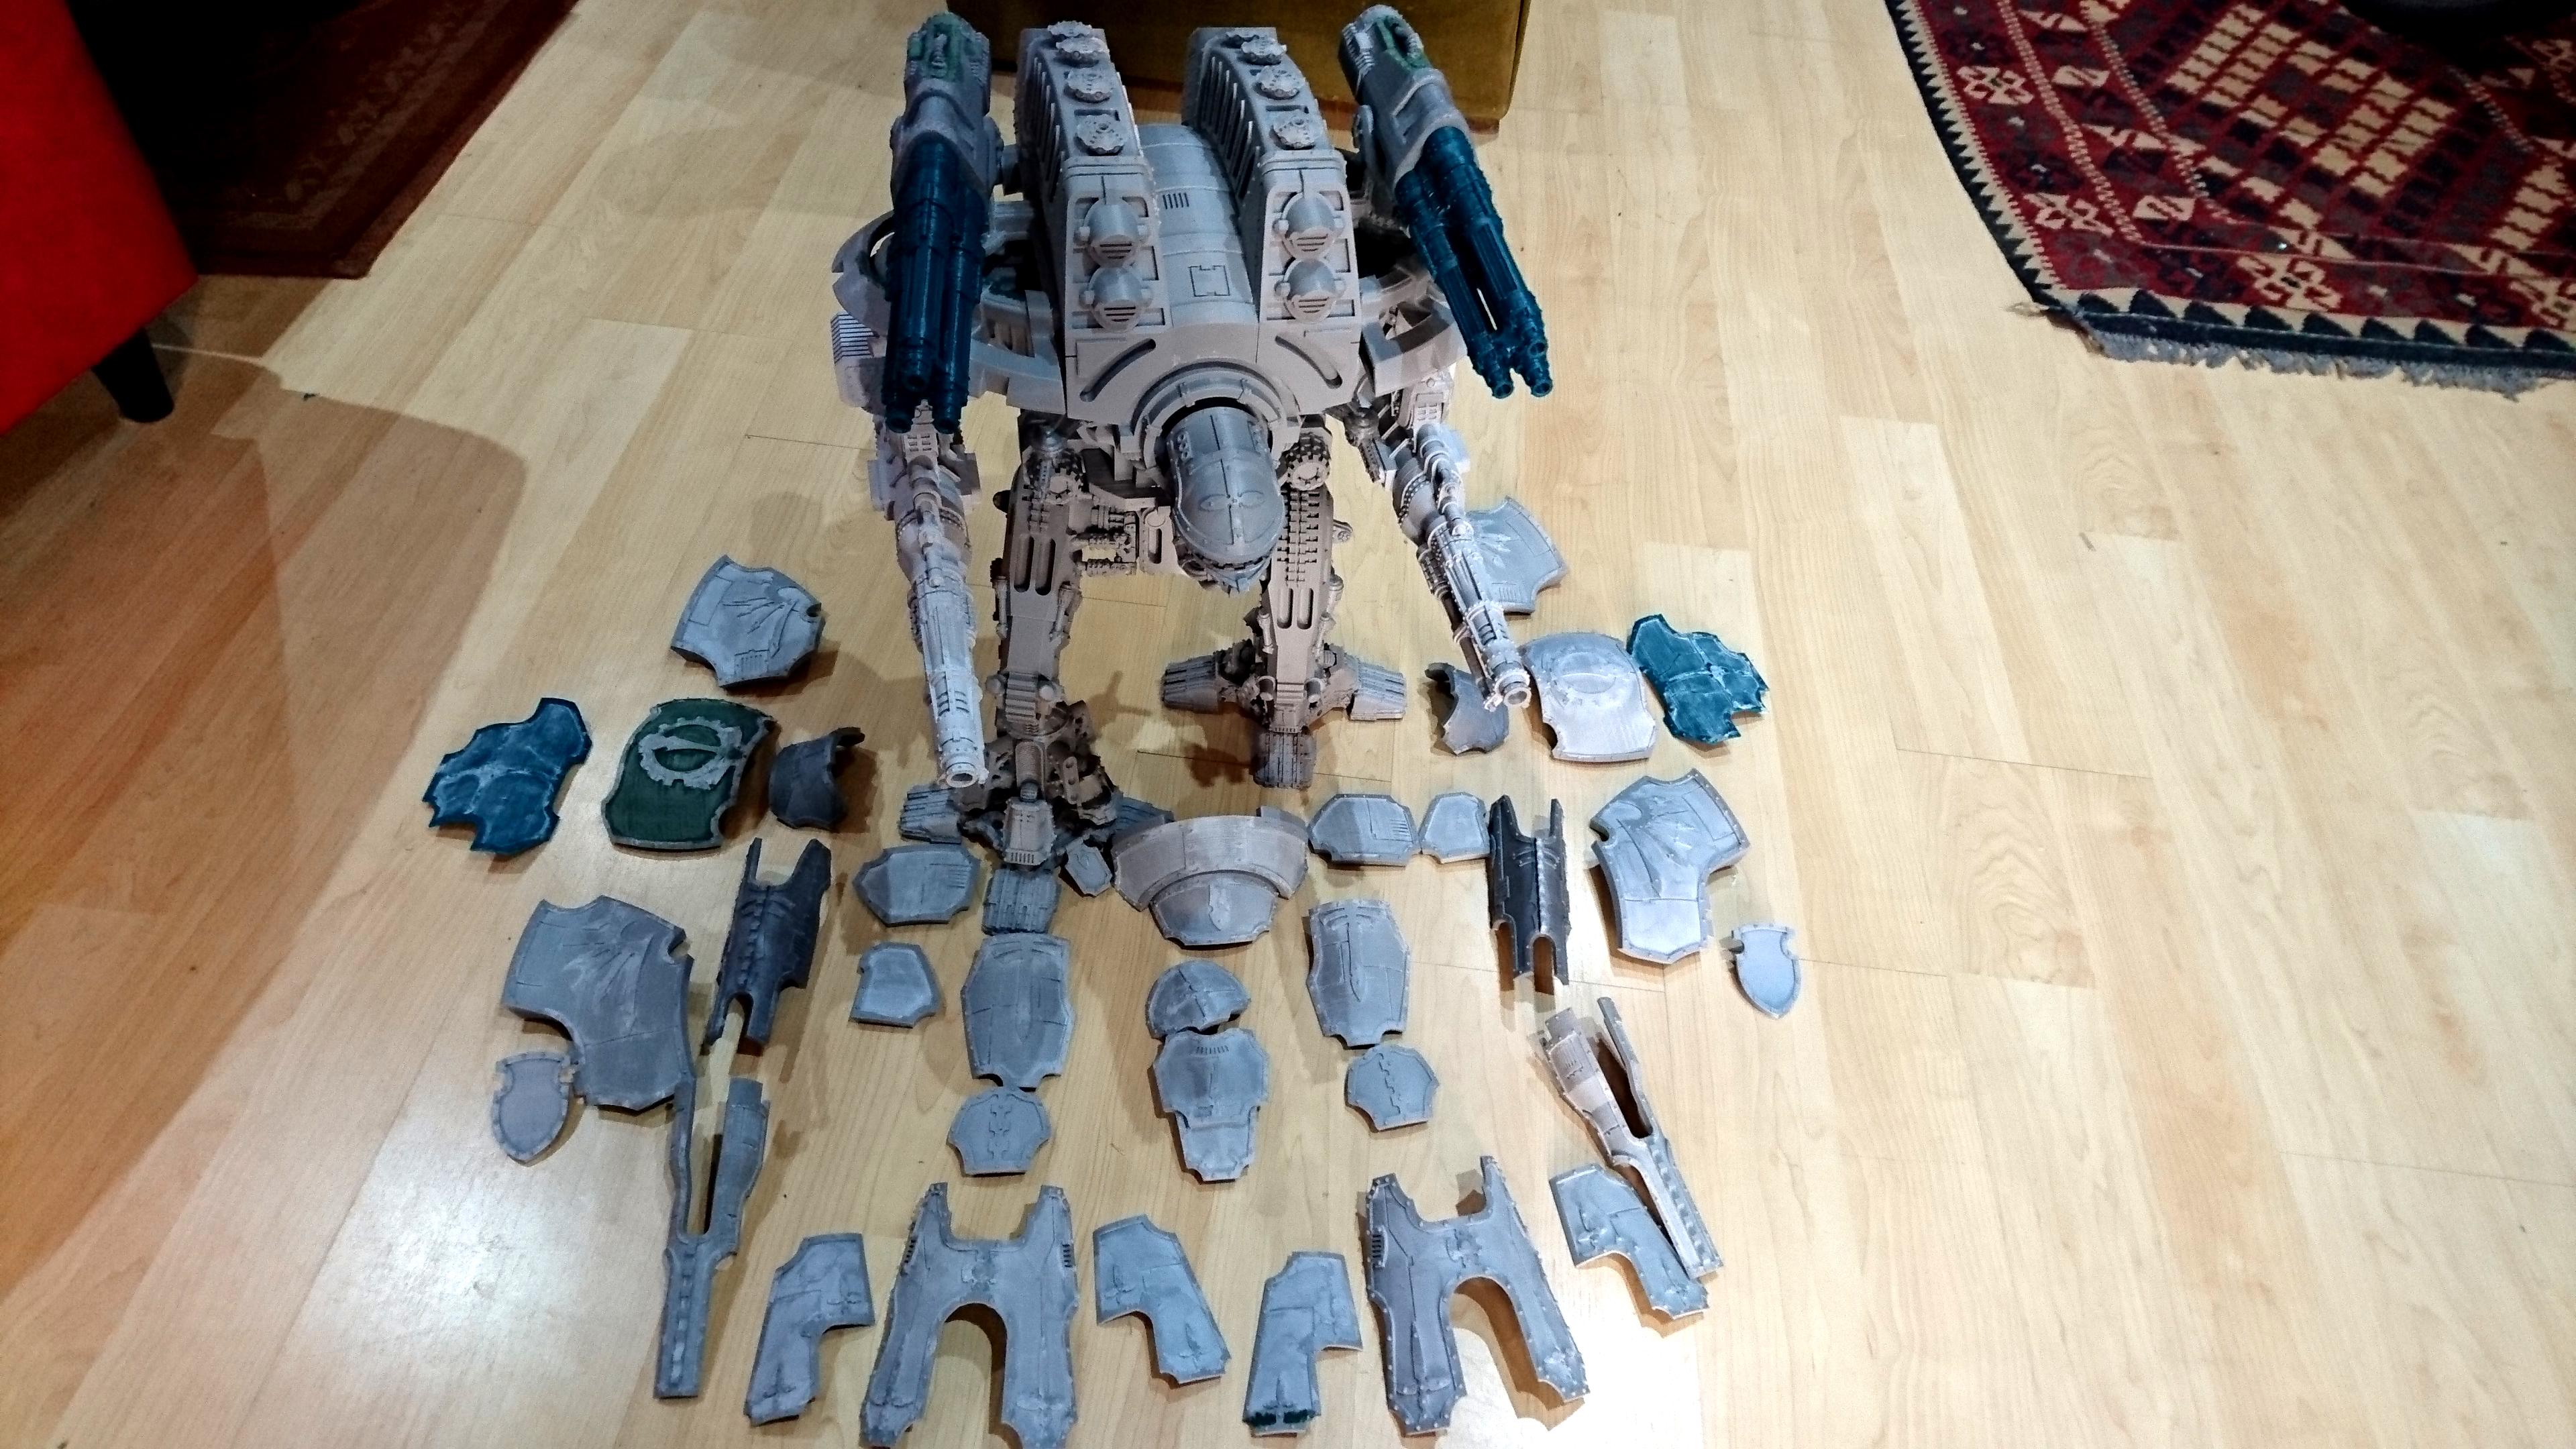 All the pieces of the titan